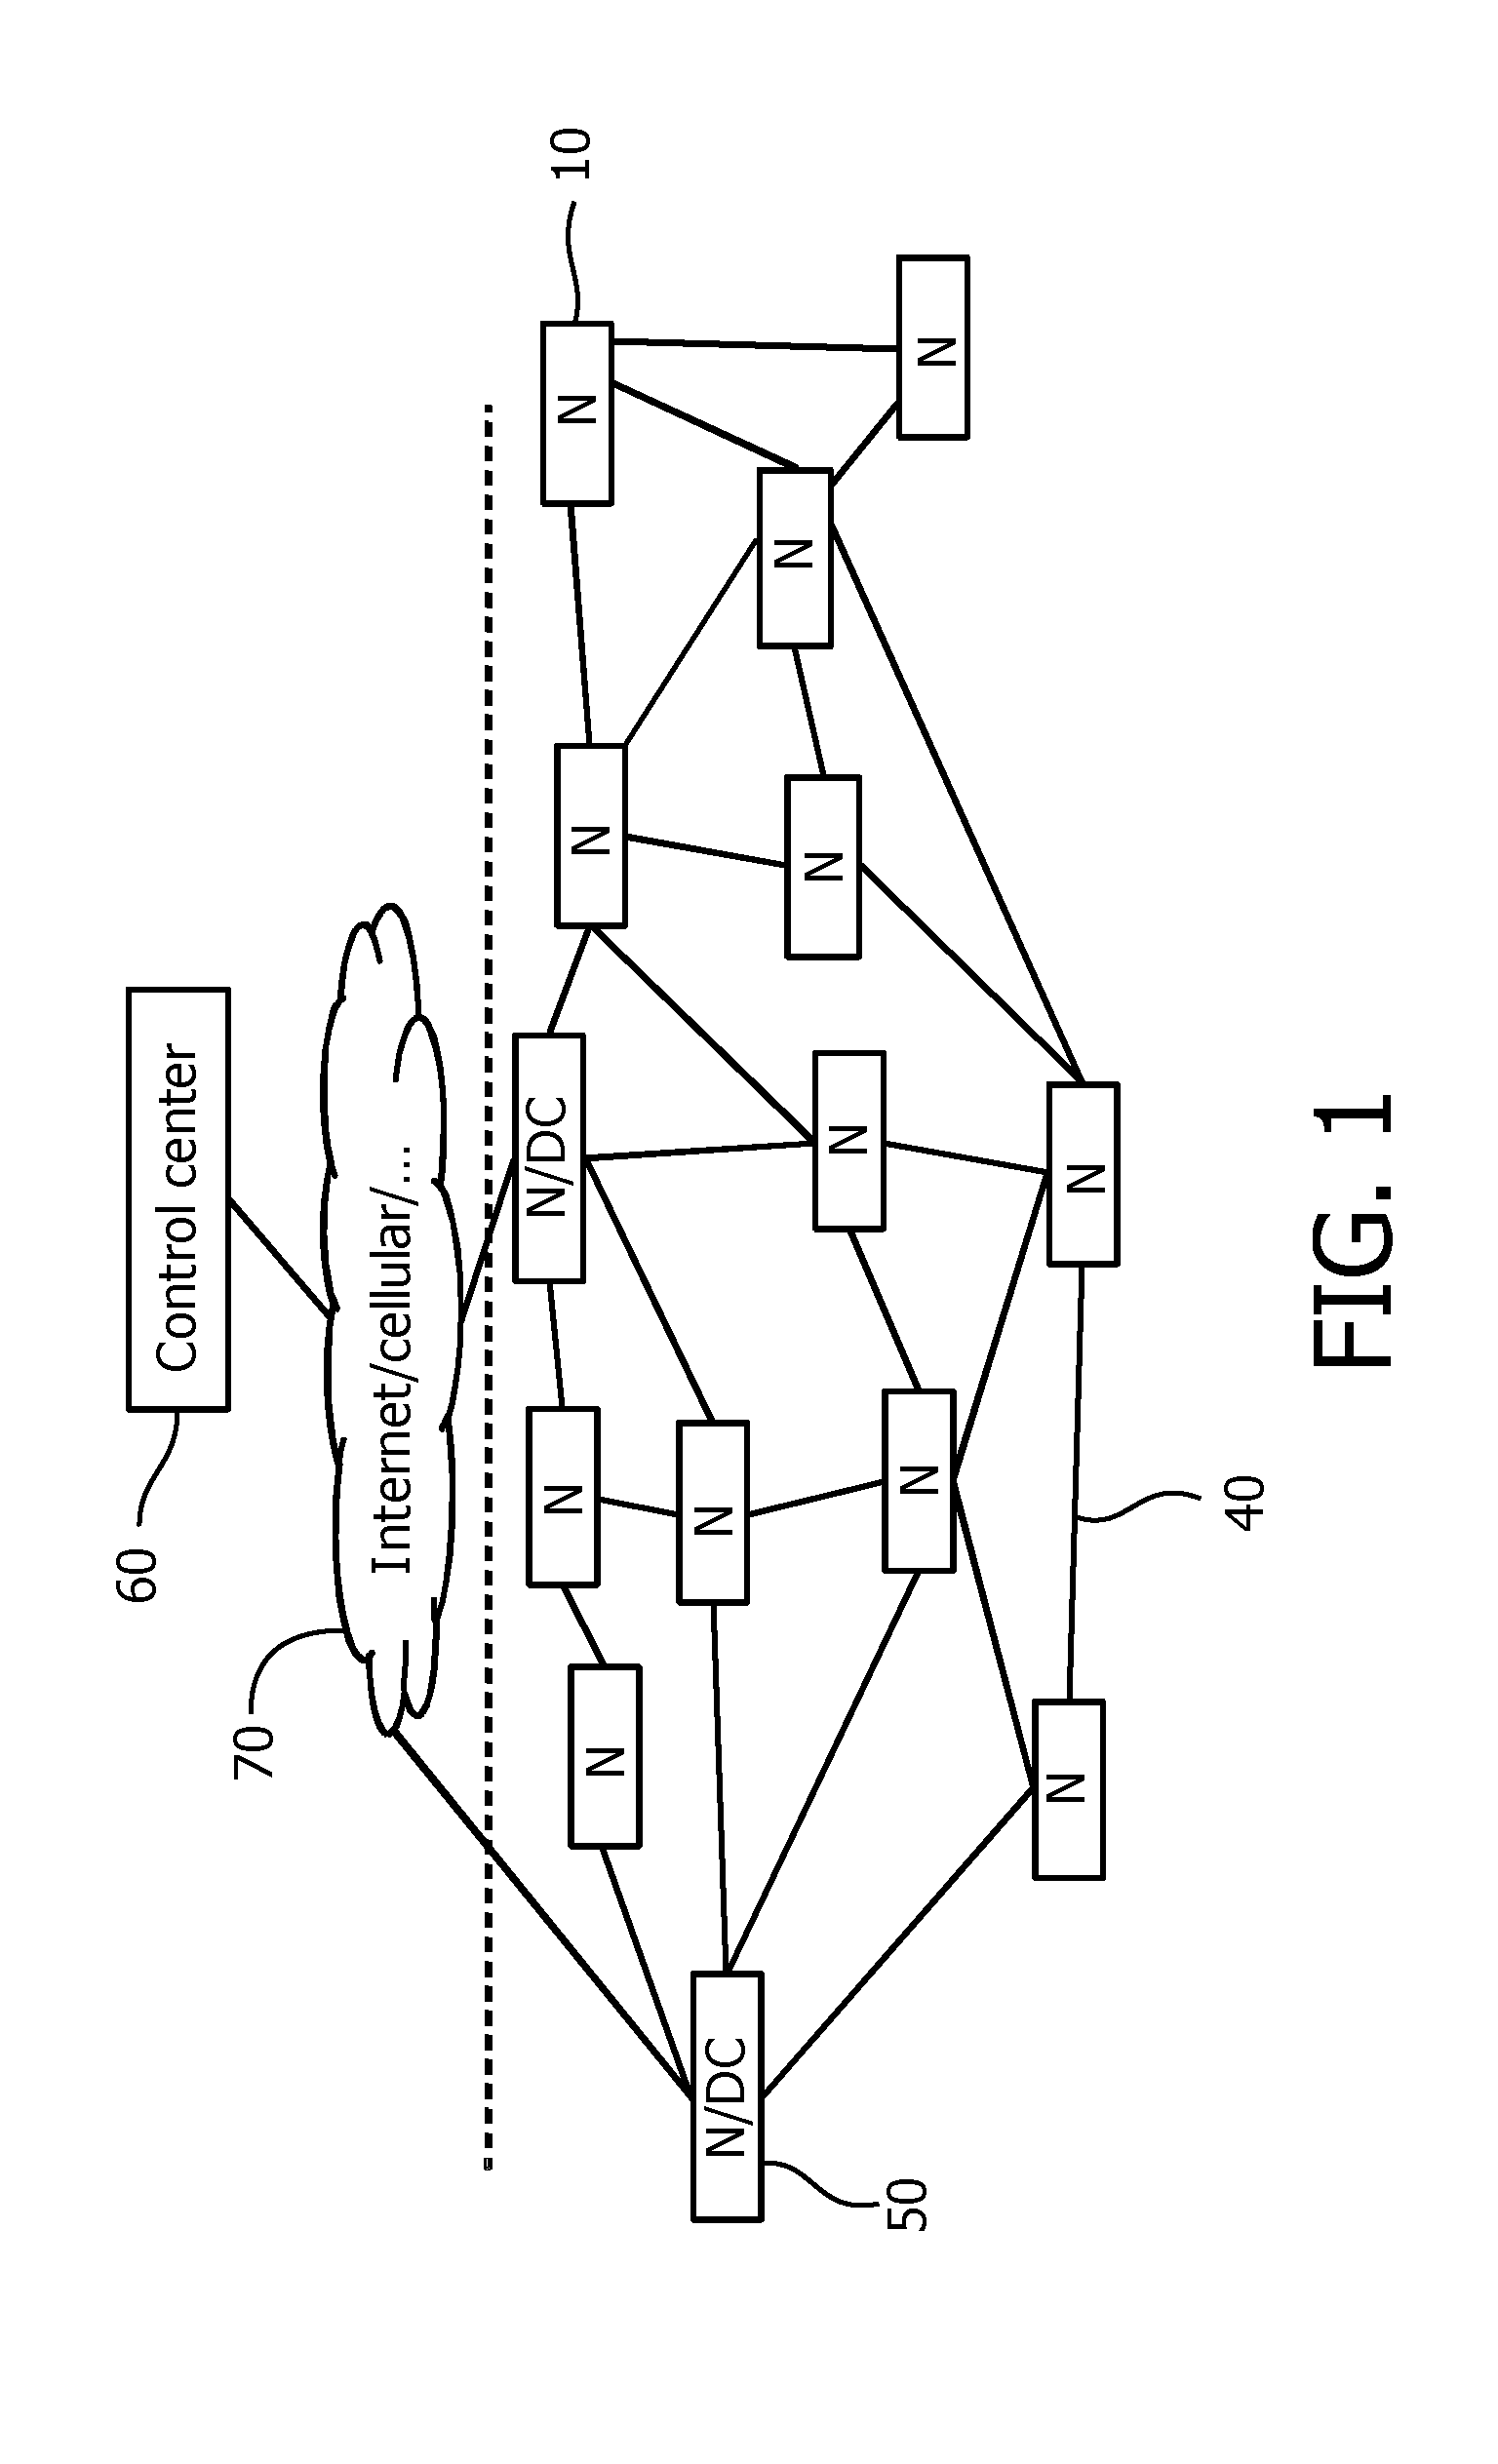 Device and method for delay optimization of end-to-end data packet transmissions in wireless networks